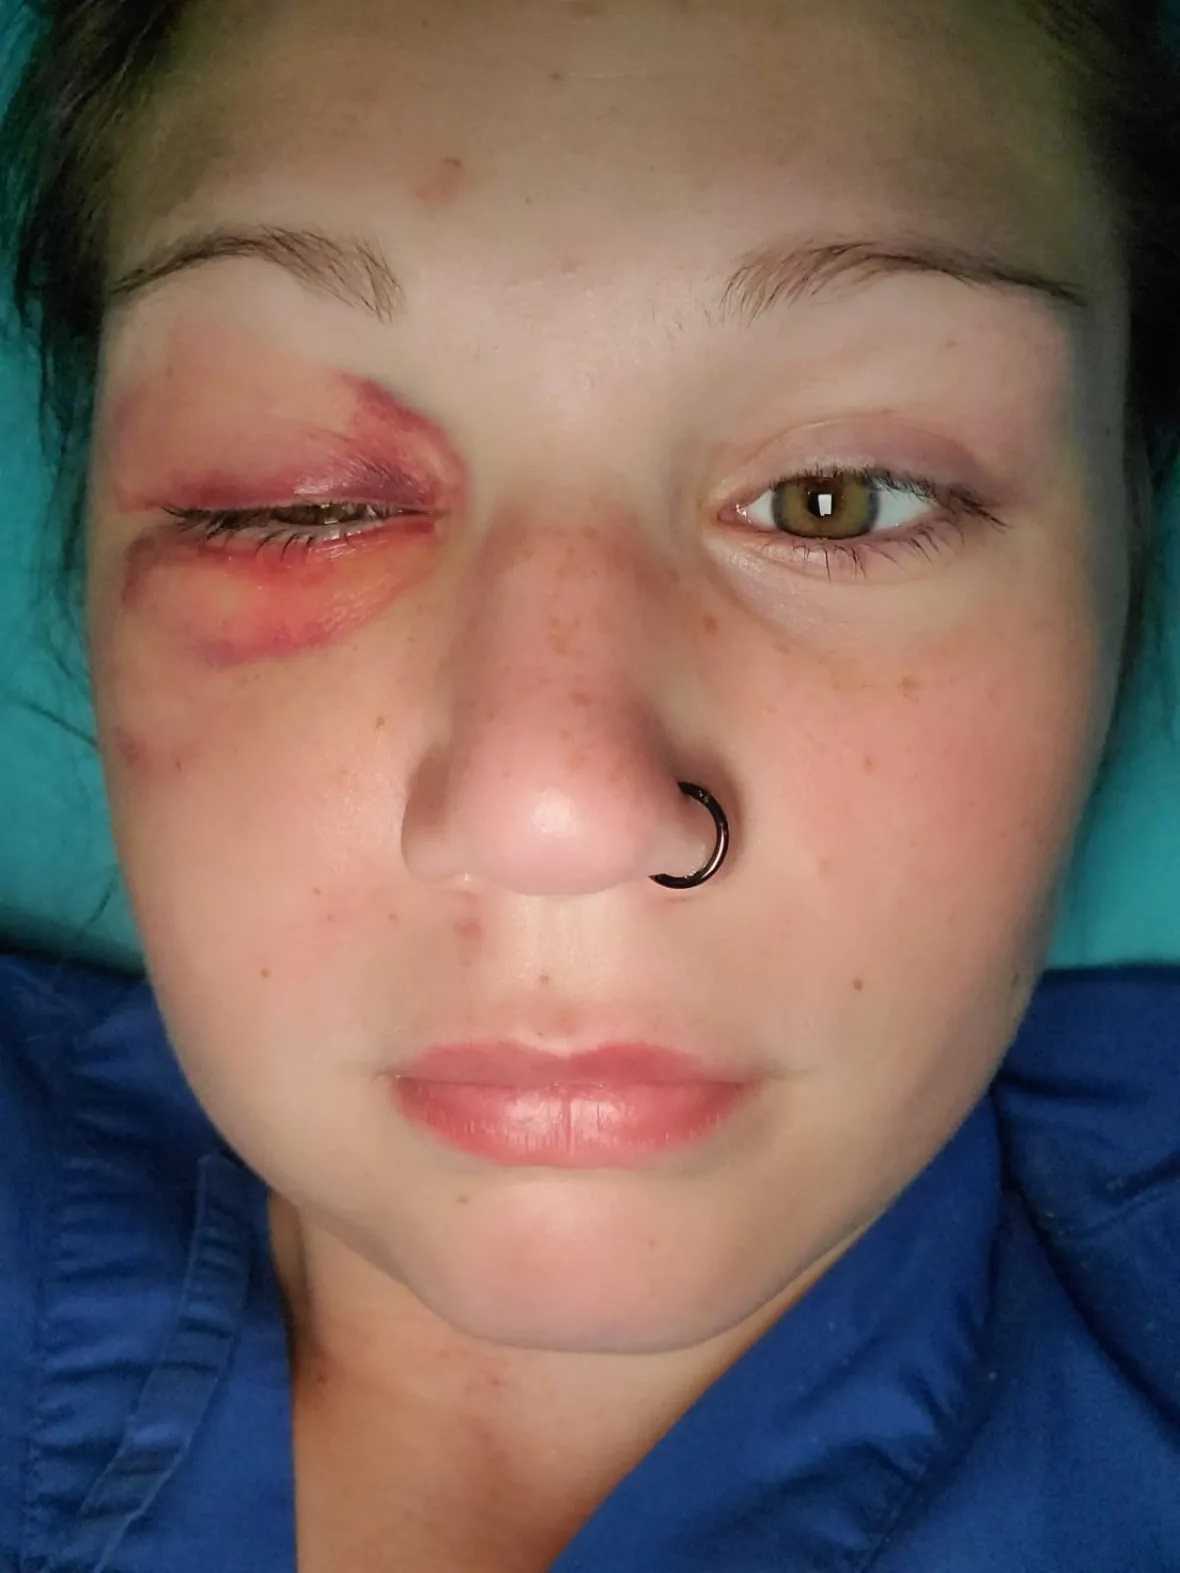 After the accident, Cathryn Ferster's face entire face swelled up. She needs urgent surgery before March 31 or else doctors say the bones in her face will set incorrectly. (Cathryn Ferster)